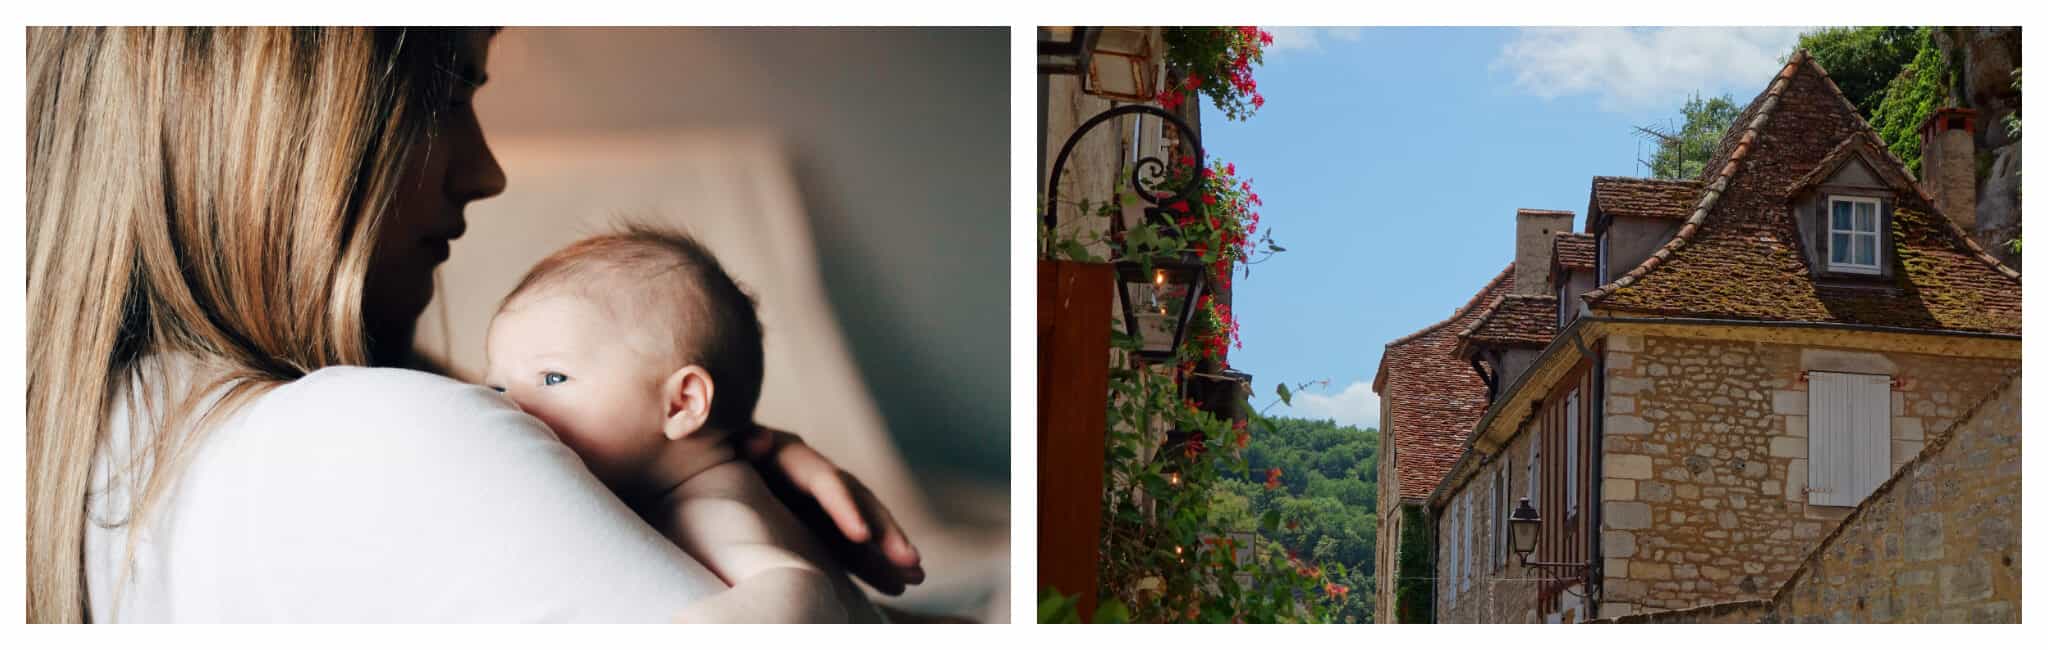 Left: A mother with blonde hair holds a newborn in her arms; Right: A beautiful French village called Rocamadour that is full of small concrete houses covered in red roses.